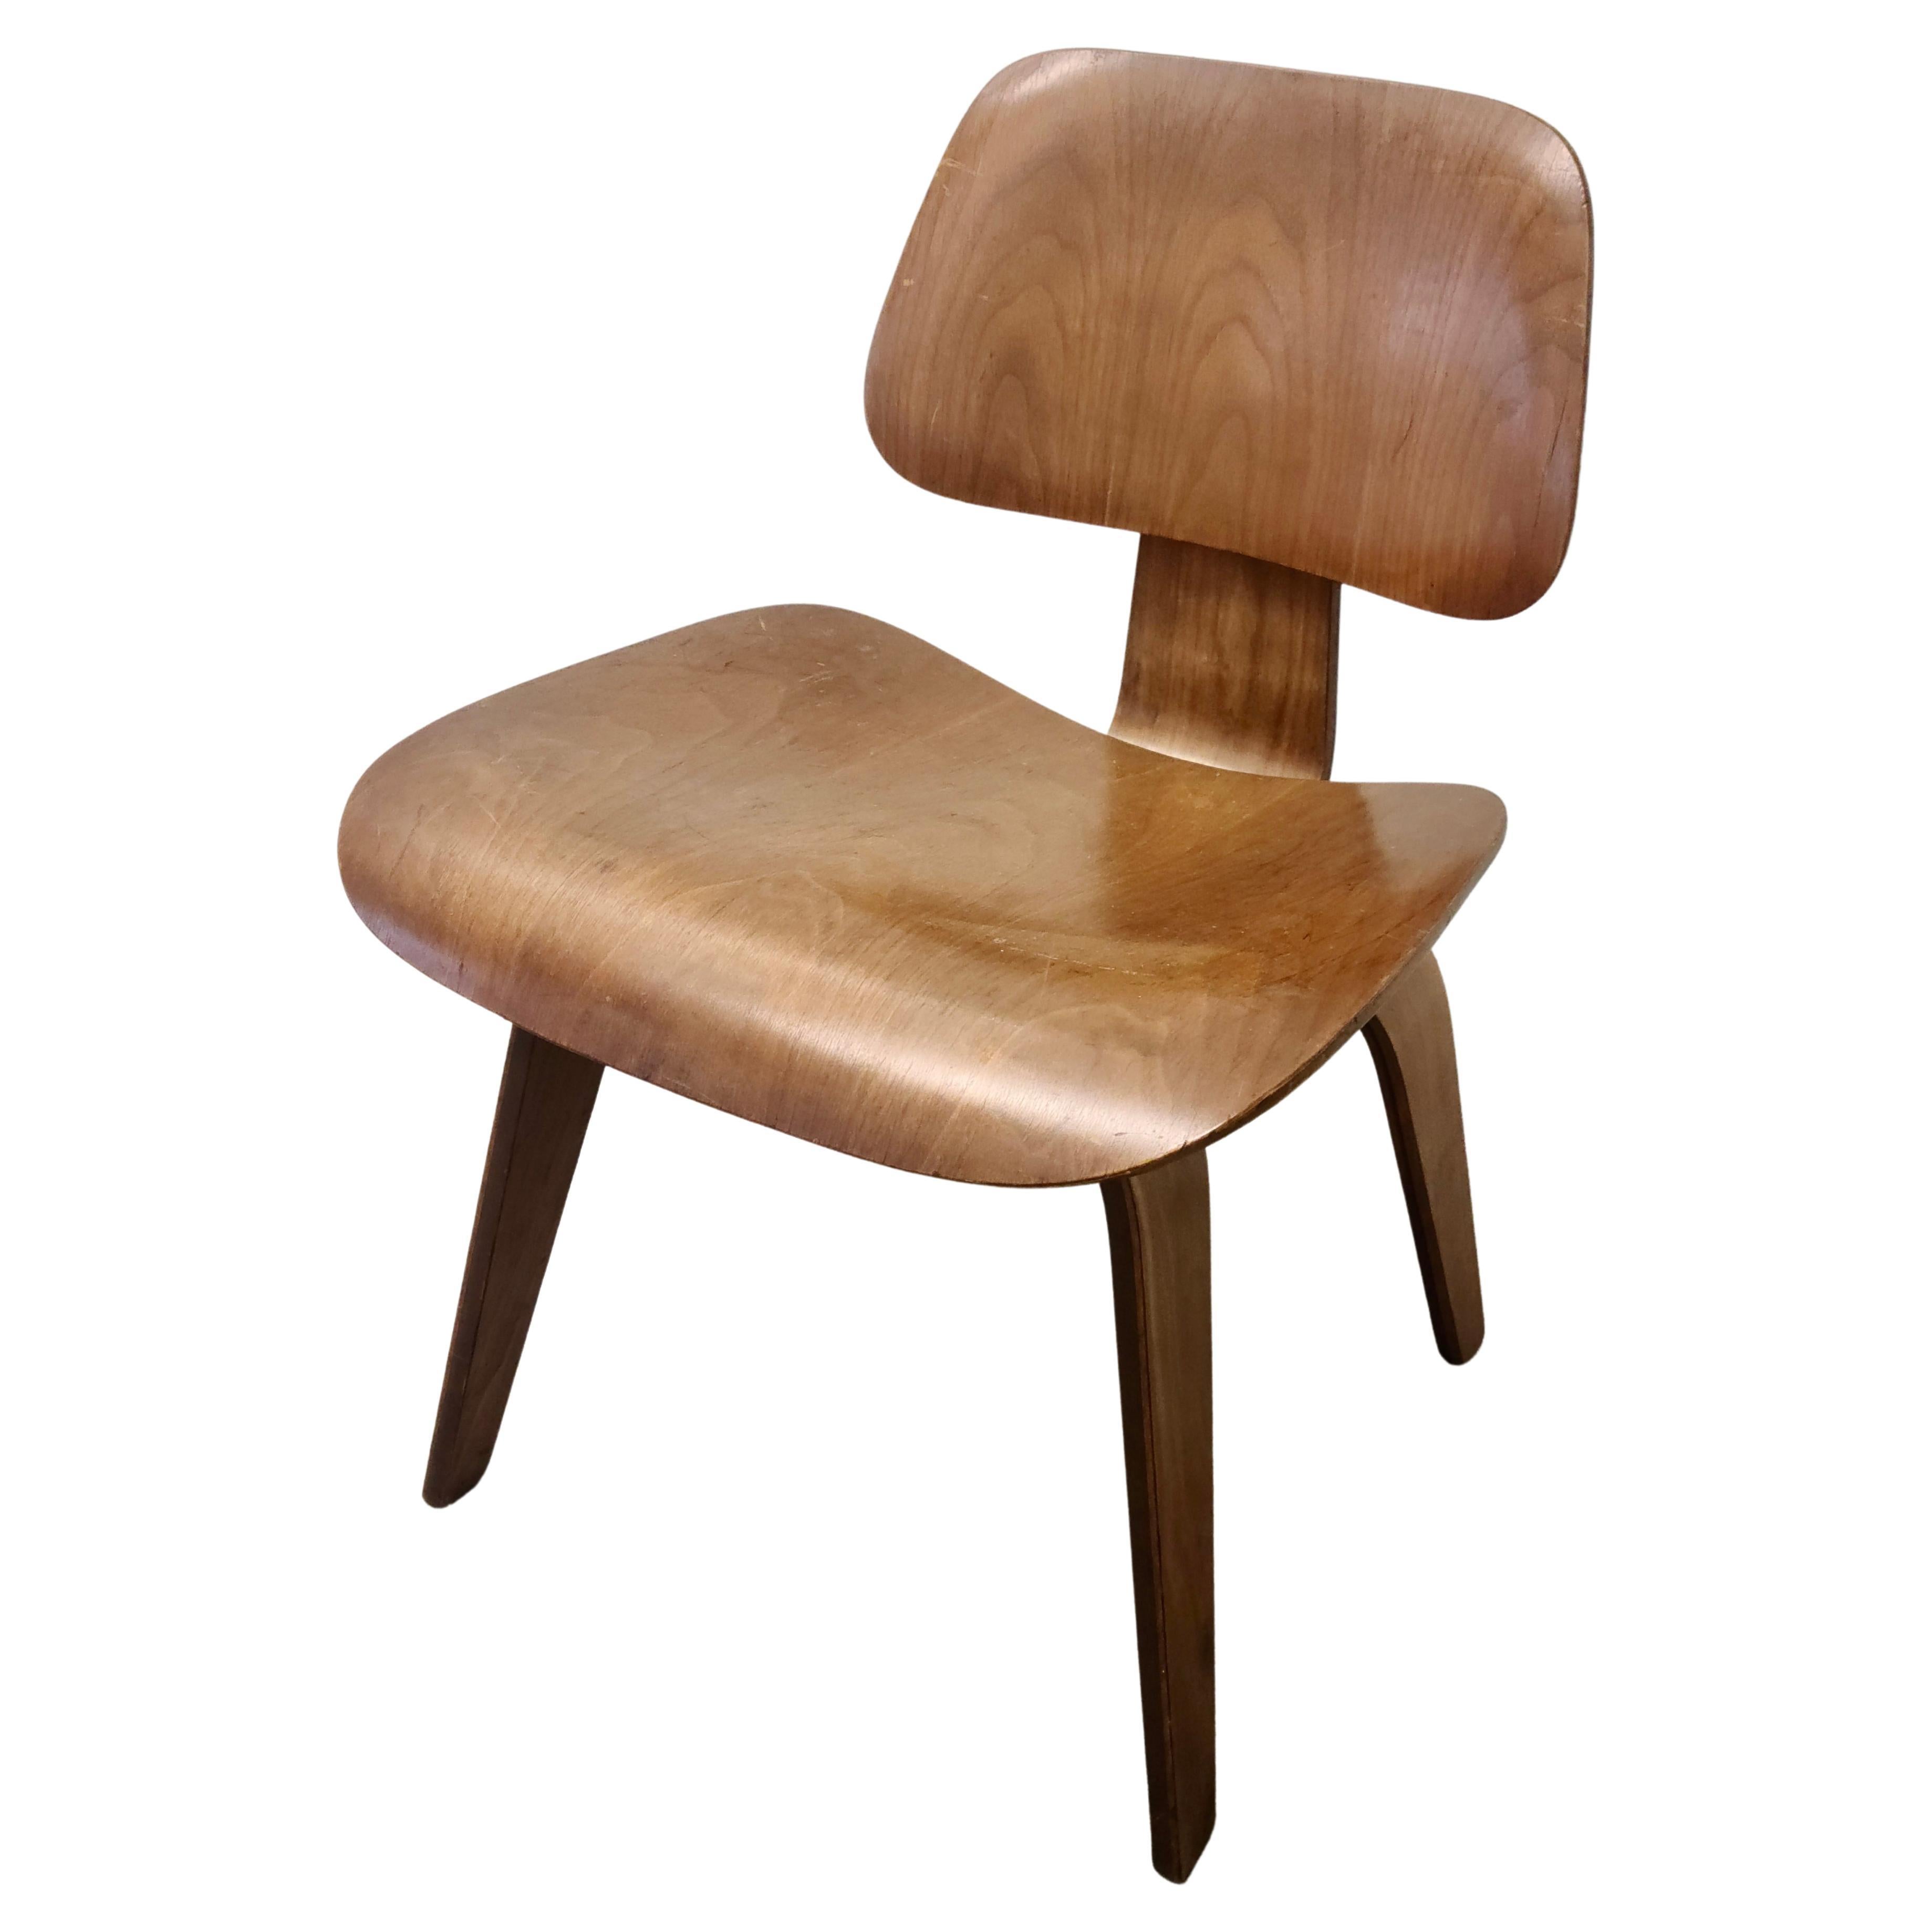 Eames Herman Miller Molded Plywood Walnut DCW Dining Chair Wood In Good Condition For Sale In Fraser, MI